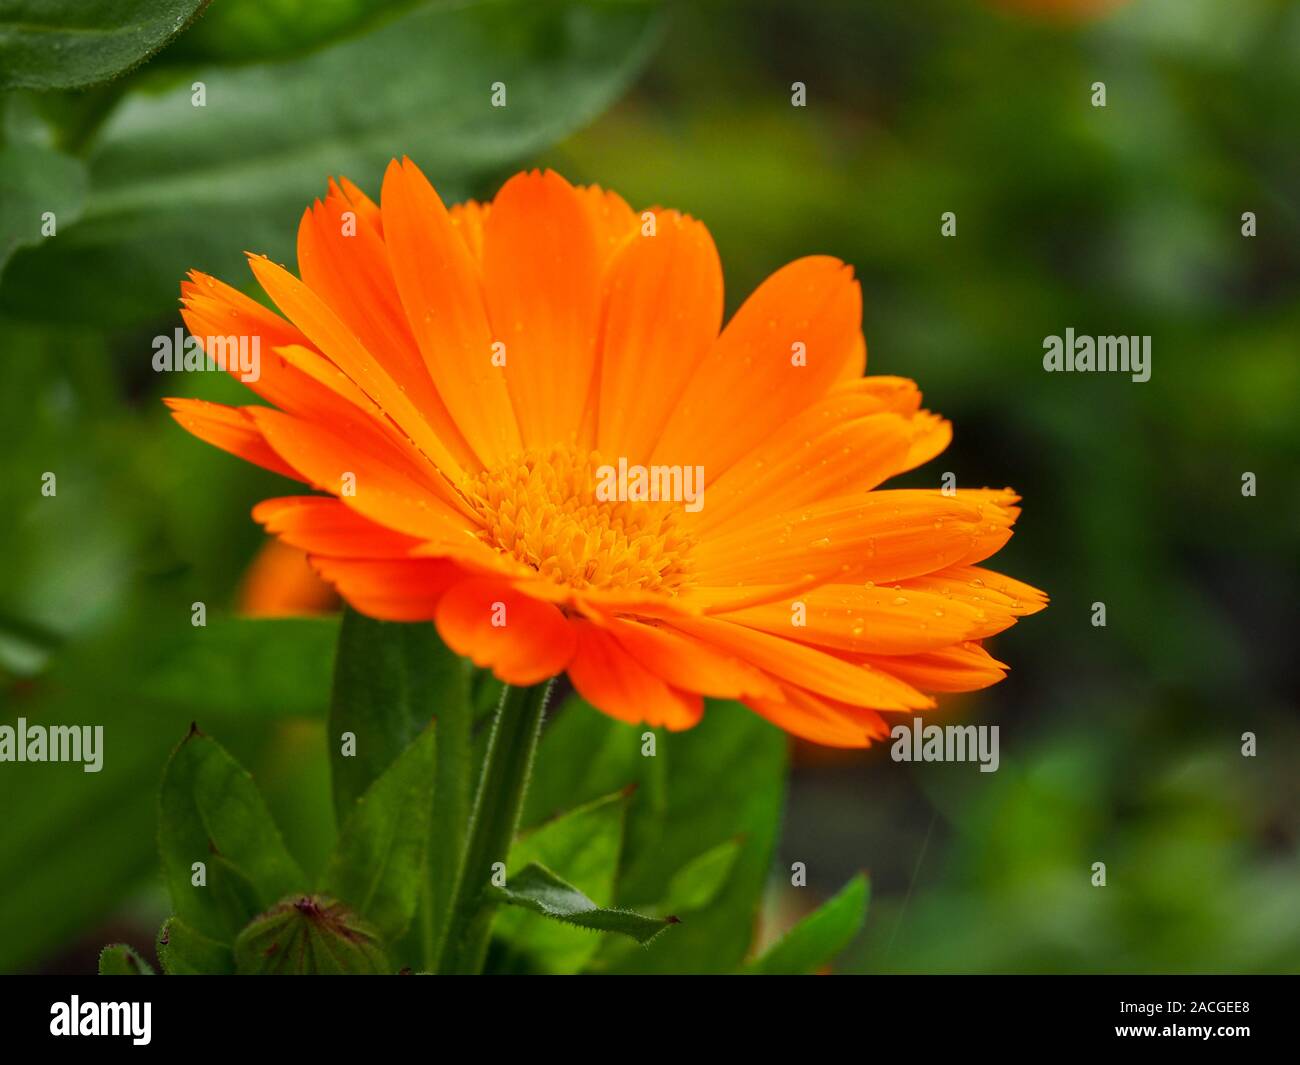 Closeup of a marigold flower, Calendula, with orange petals and green leaves Stock Photo